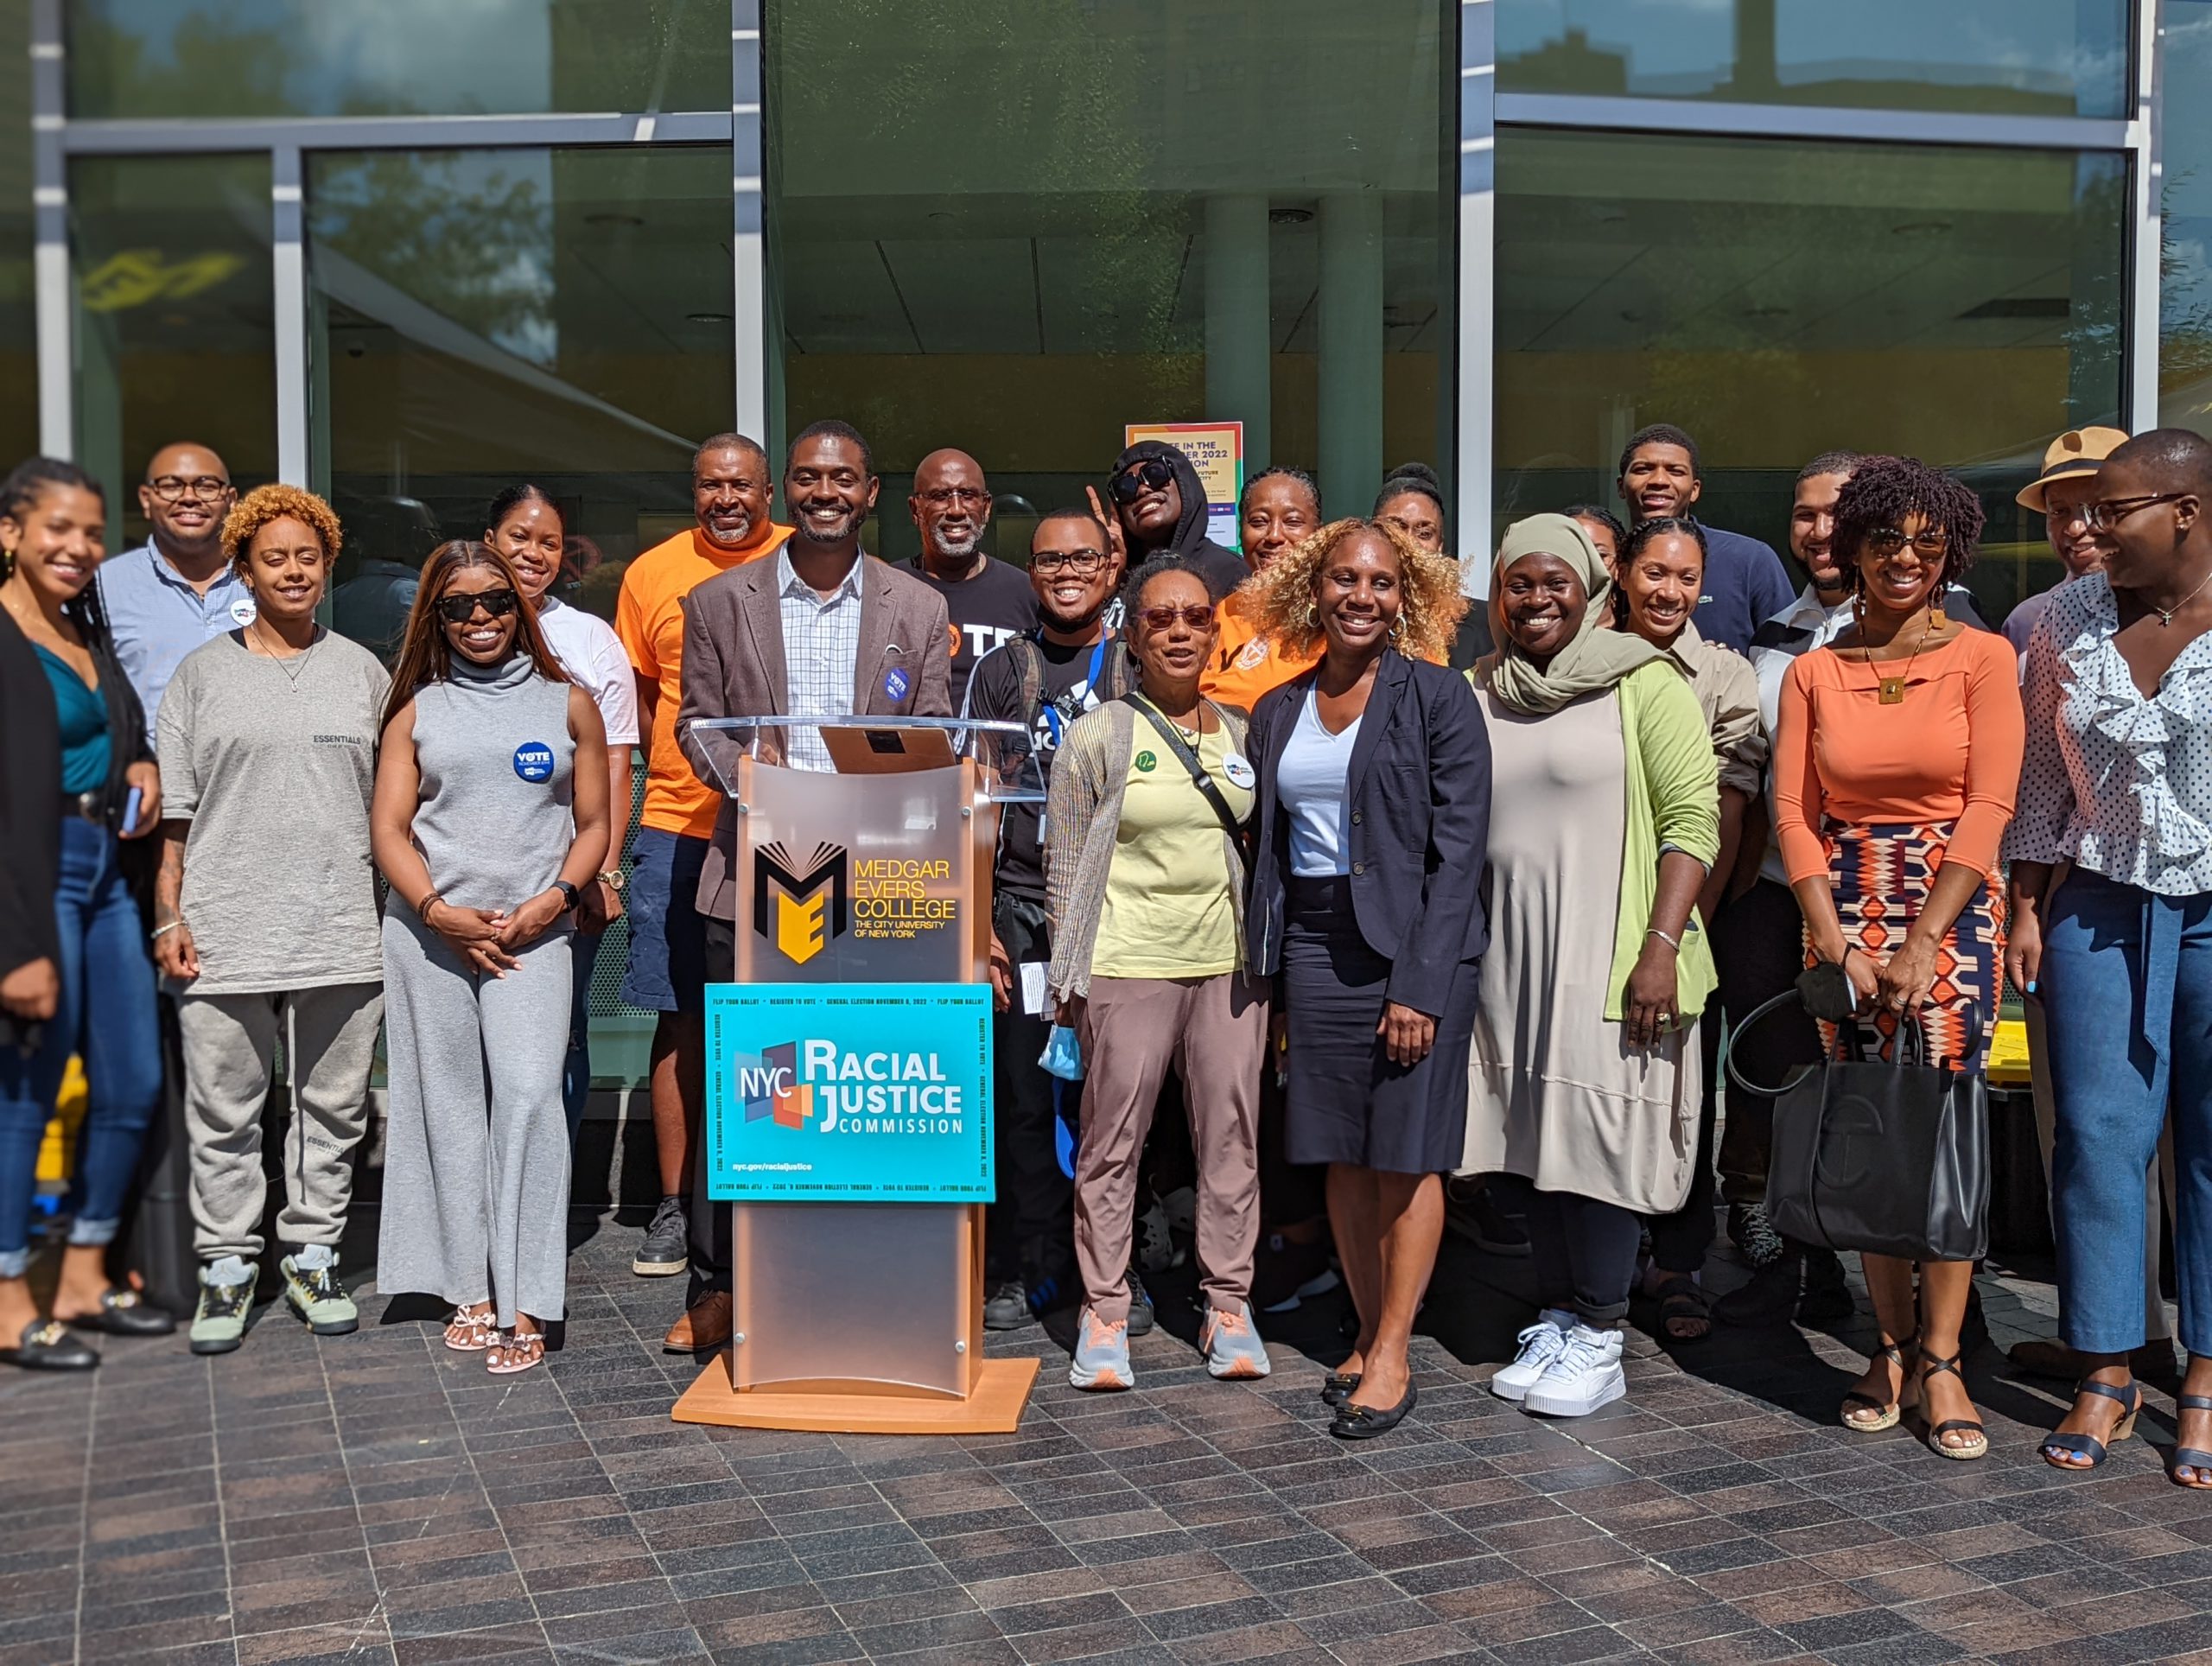 NYC’s RACIAL JUSTICE COMMISSION AND CUNY/MEDGAR EVERS COLLEGE COMMEMORATE NATIONAL VOTER REGISTRATION DAY